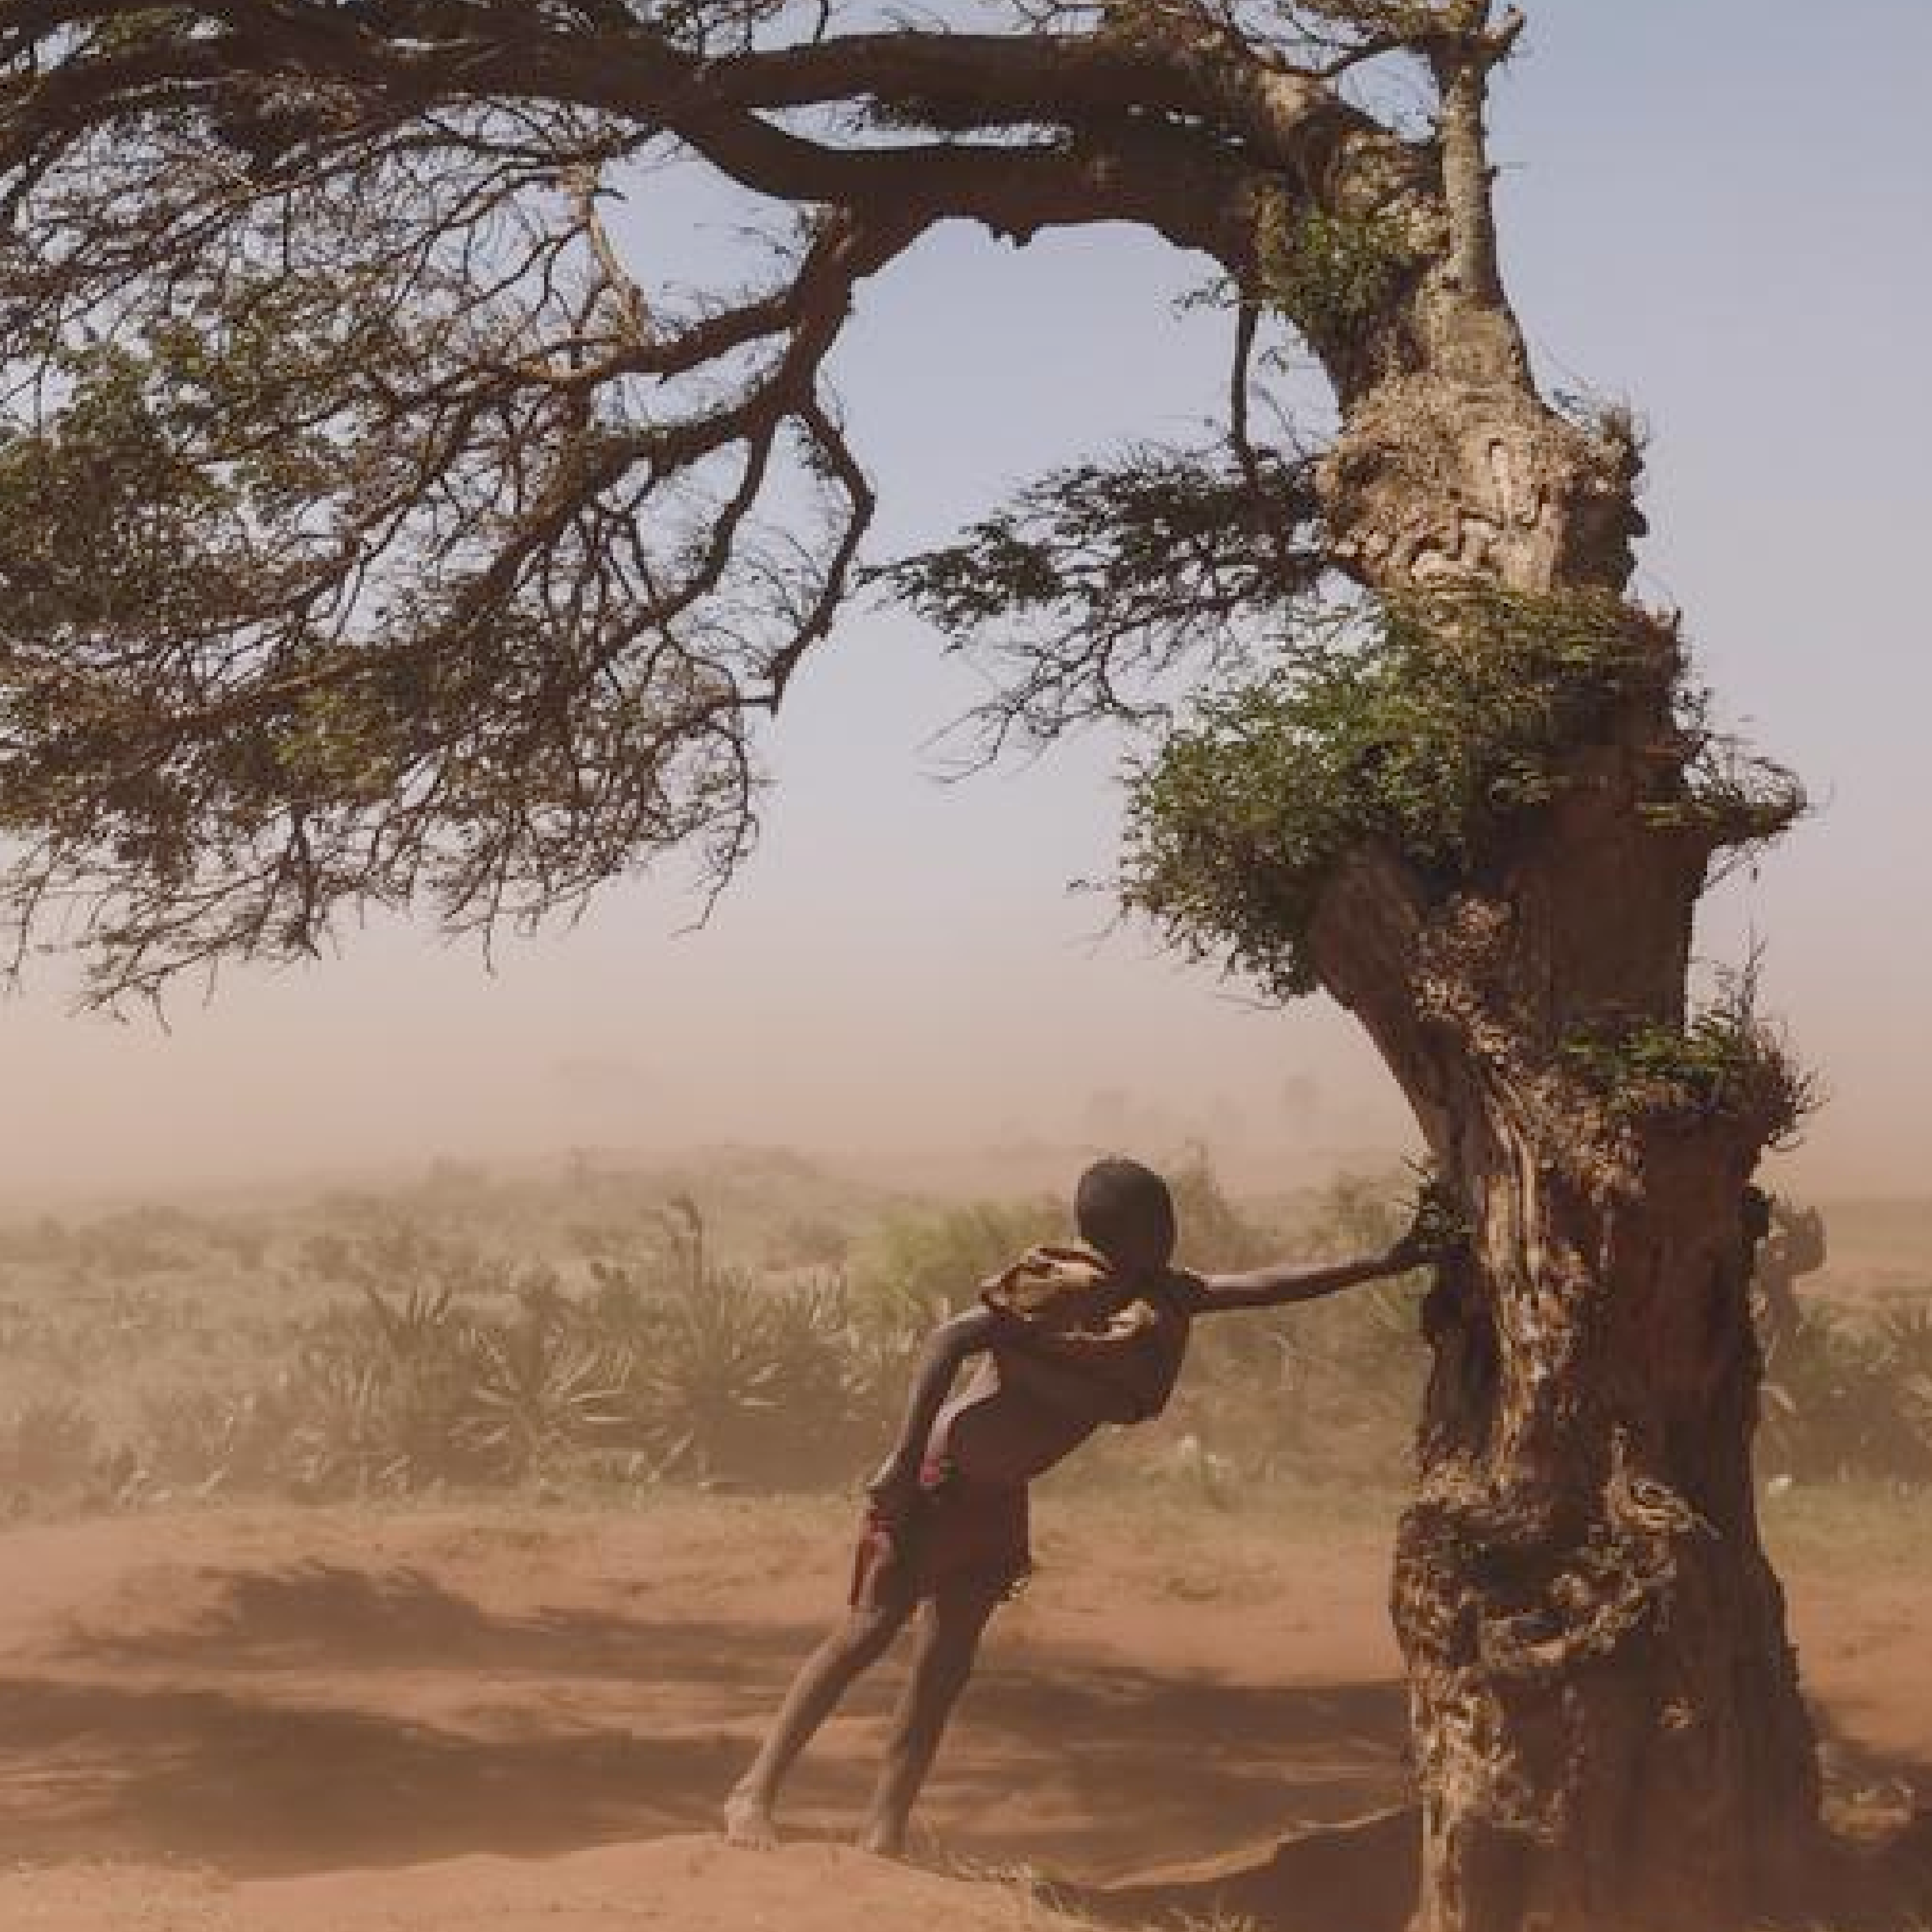 Ambovombe, Androy region, Madagascar, a boy takes shelter on a tree that grows in the direction the “Tioka” wind blows, to protect himself from the sandy wind.